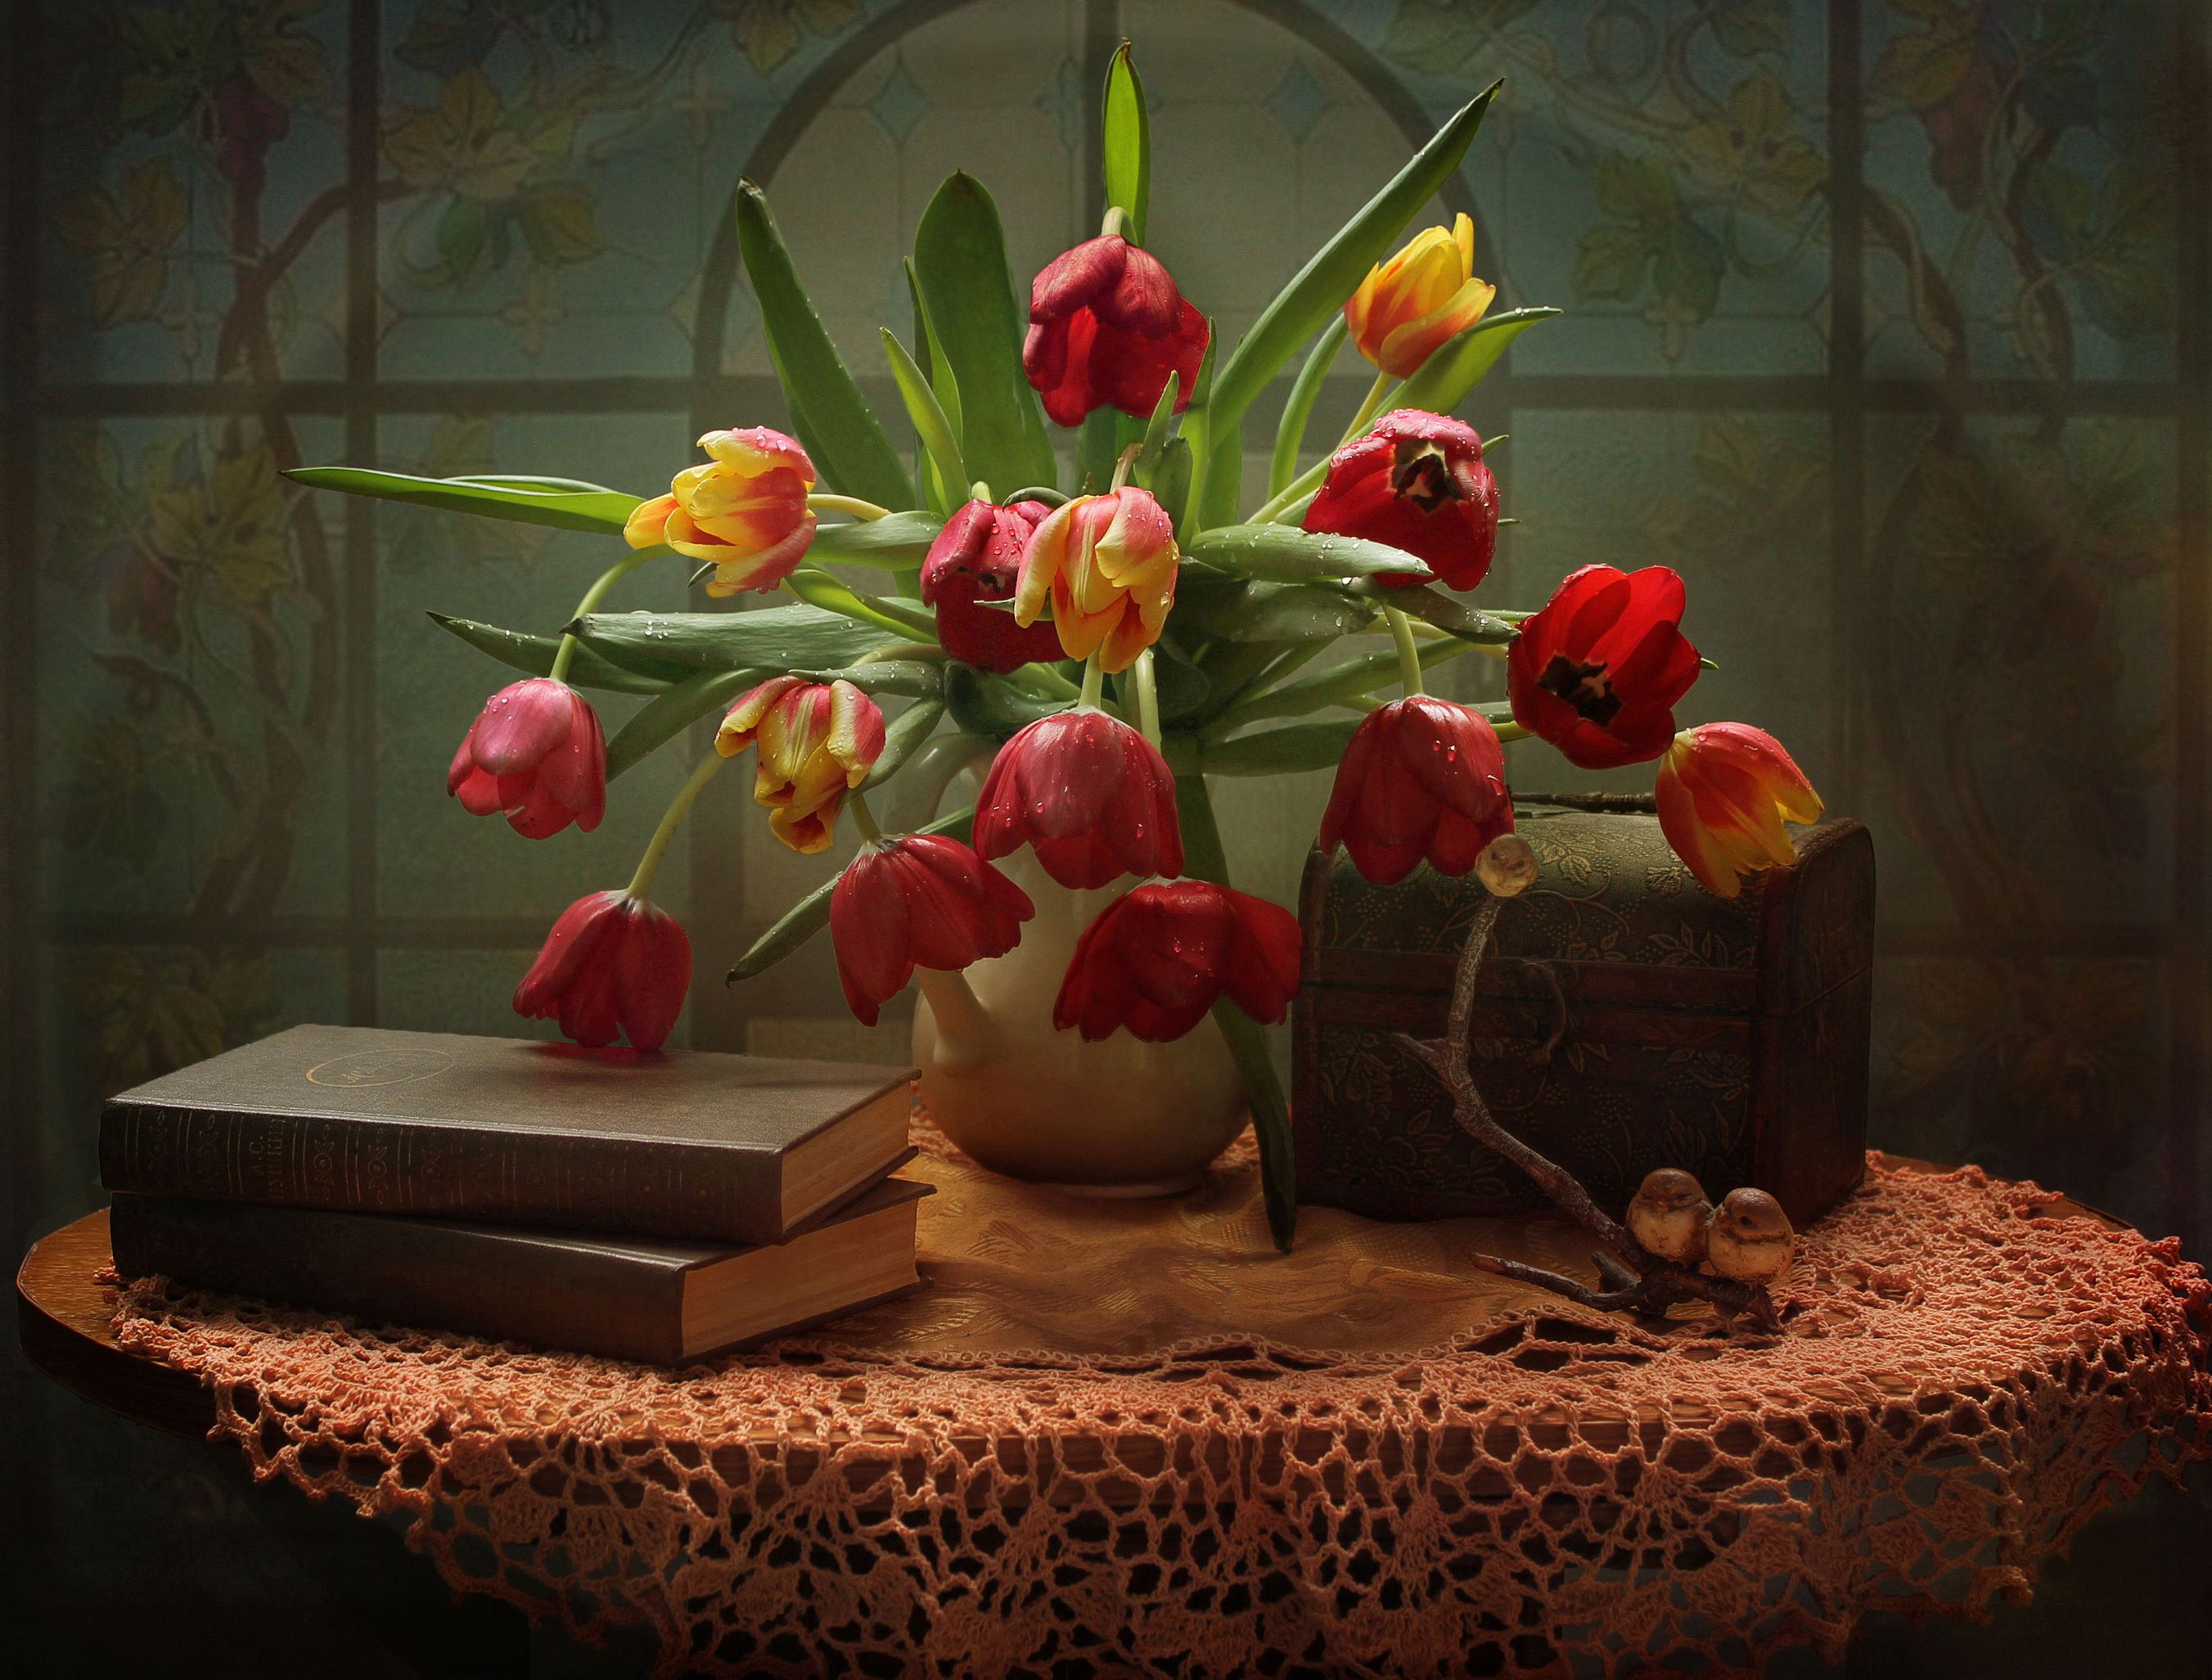 photography, still life, book, chest, red flower, tulip, vase